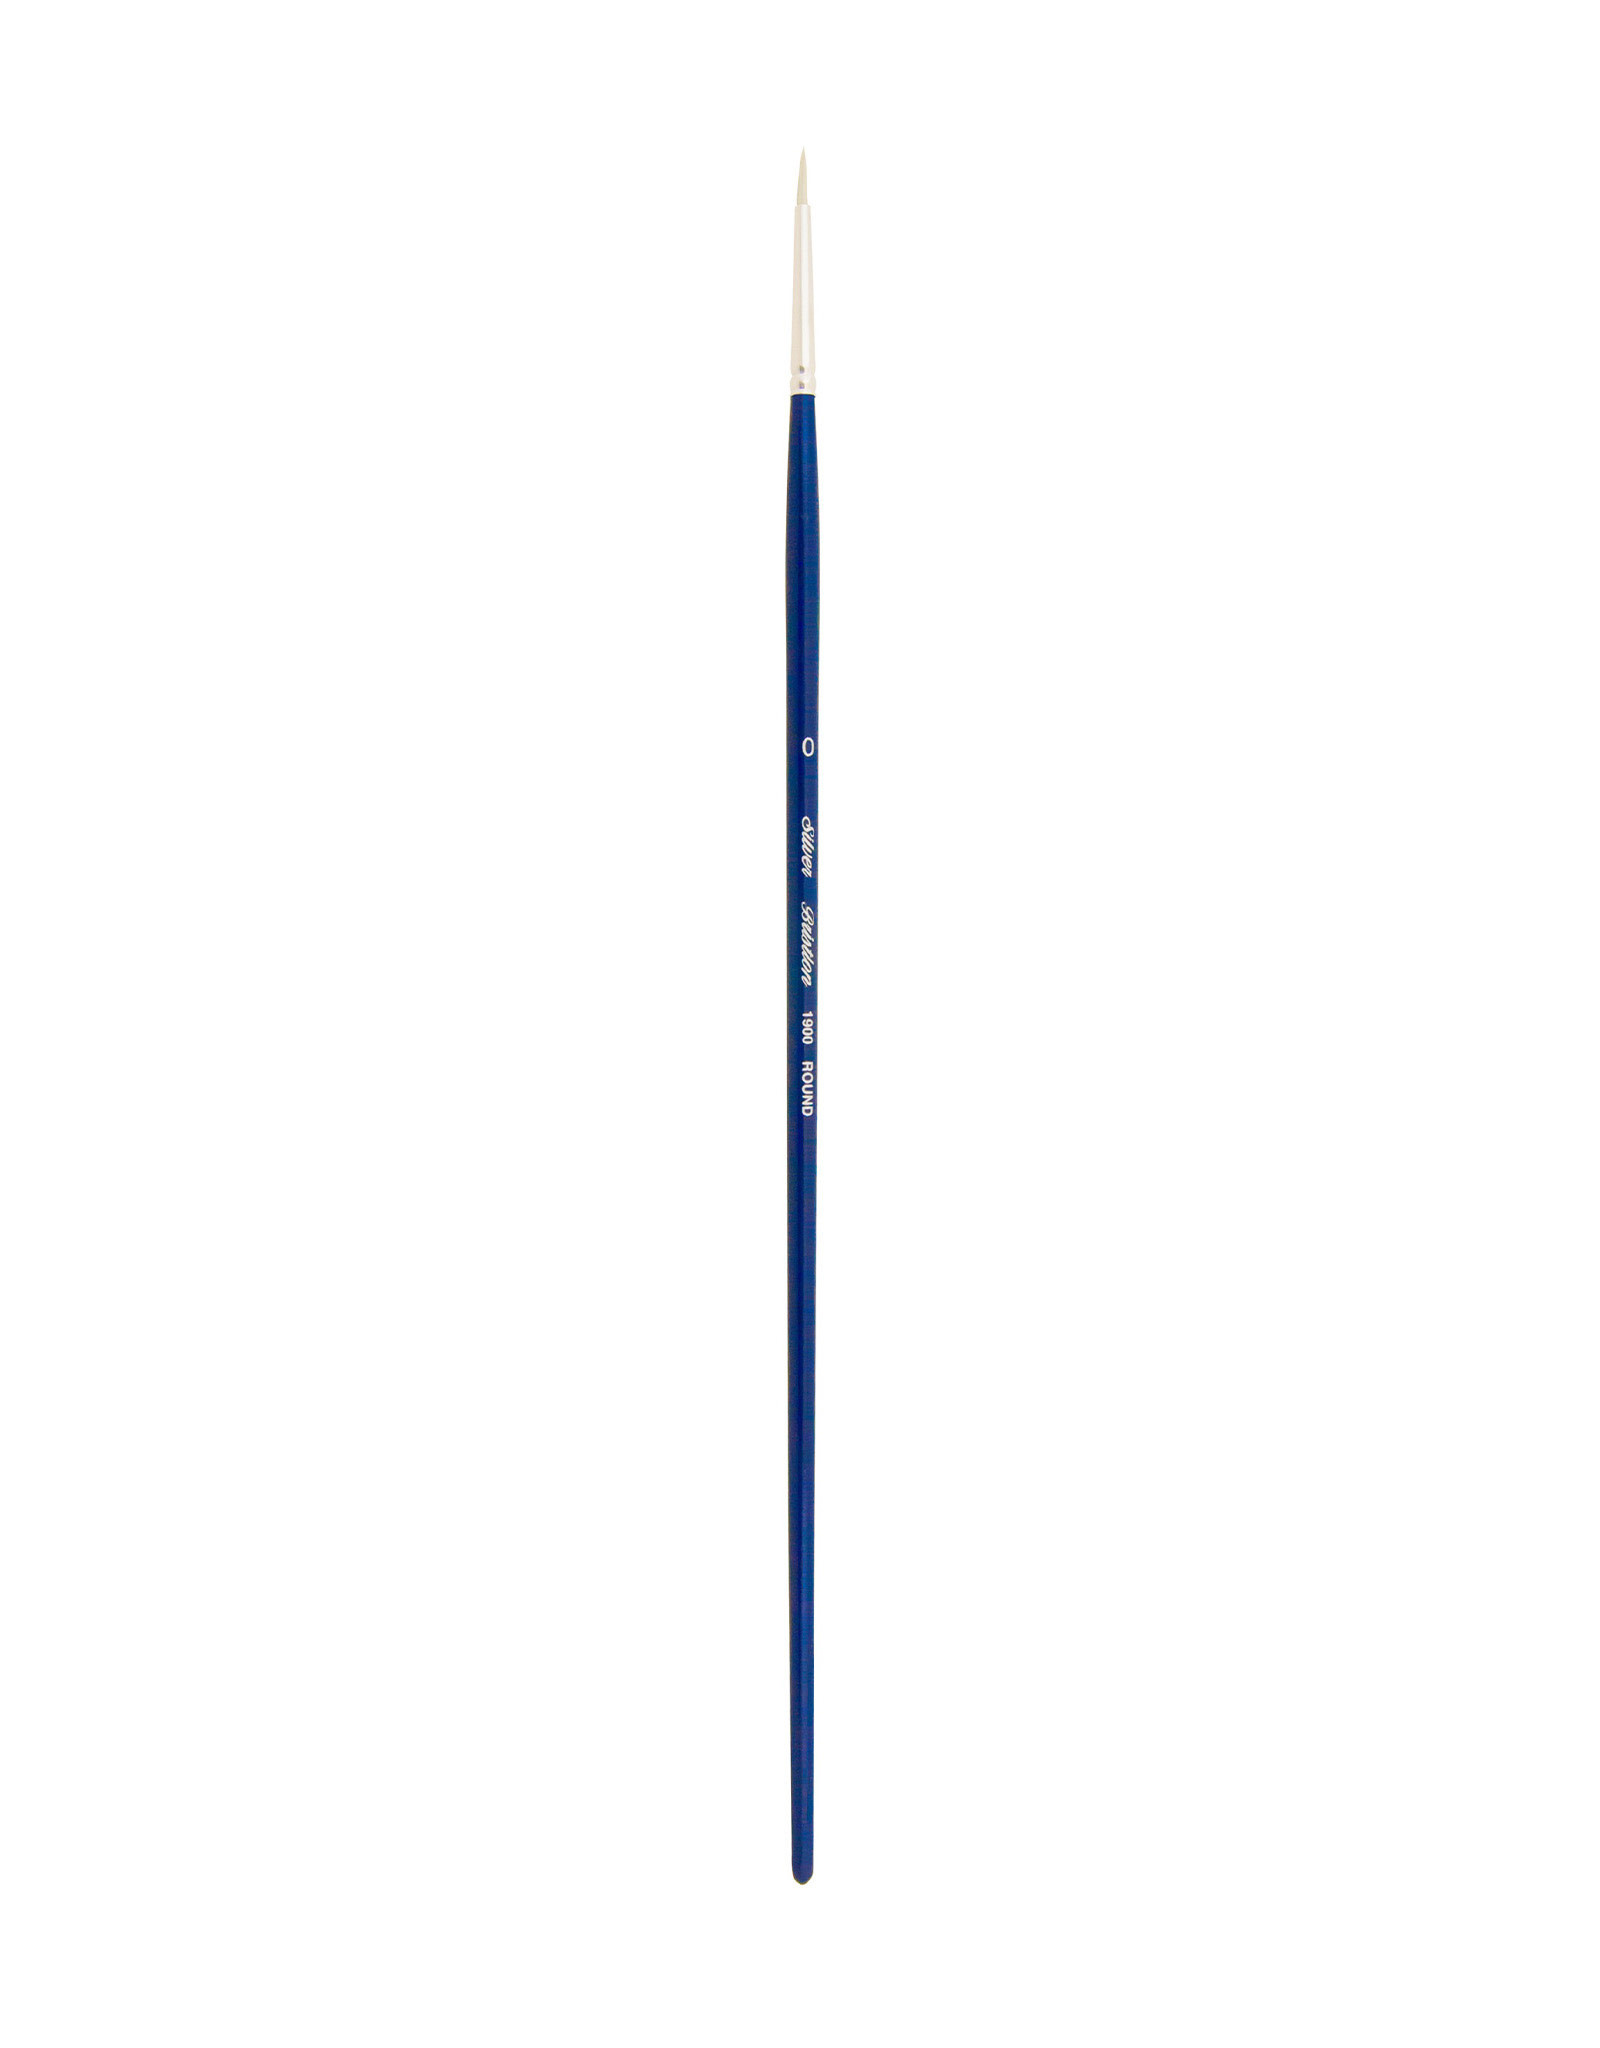 CLEARANCE CLEARANCE Silver Brush Bristlon Long Handle Round # 0